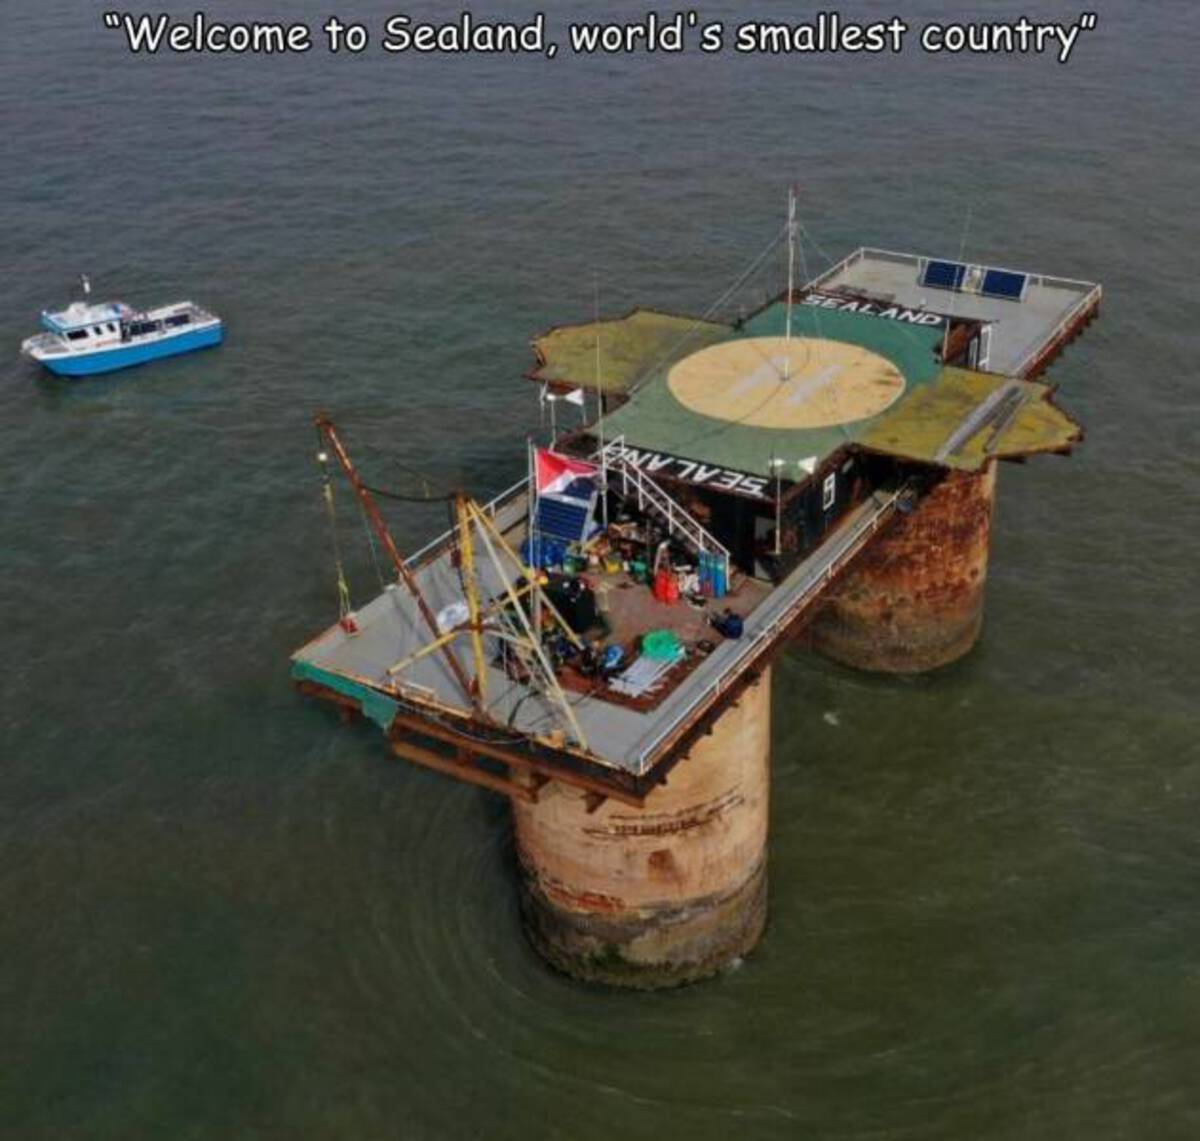 sealand country - "Welcome to Sealand, world's smallest country" A Tes Sealand